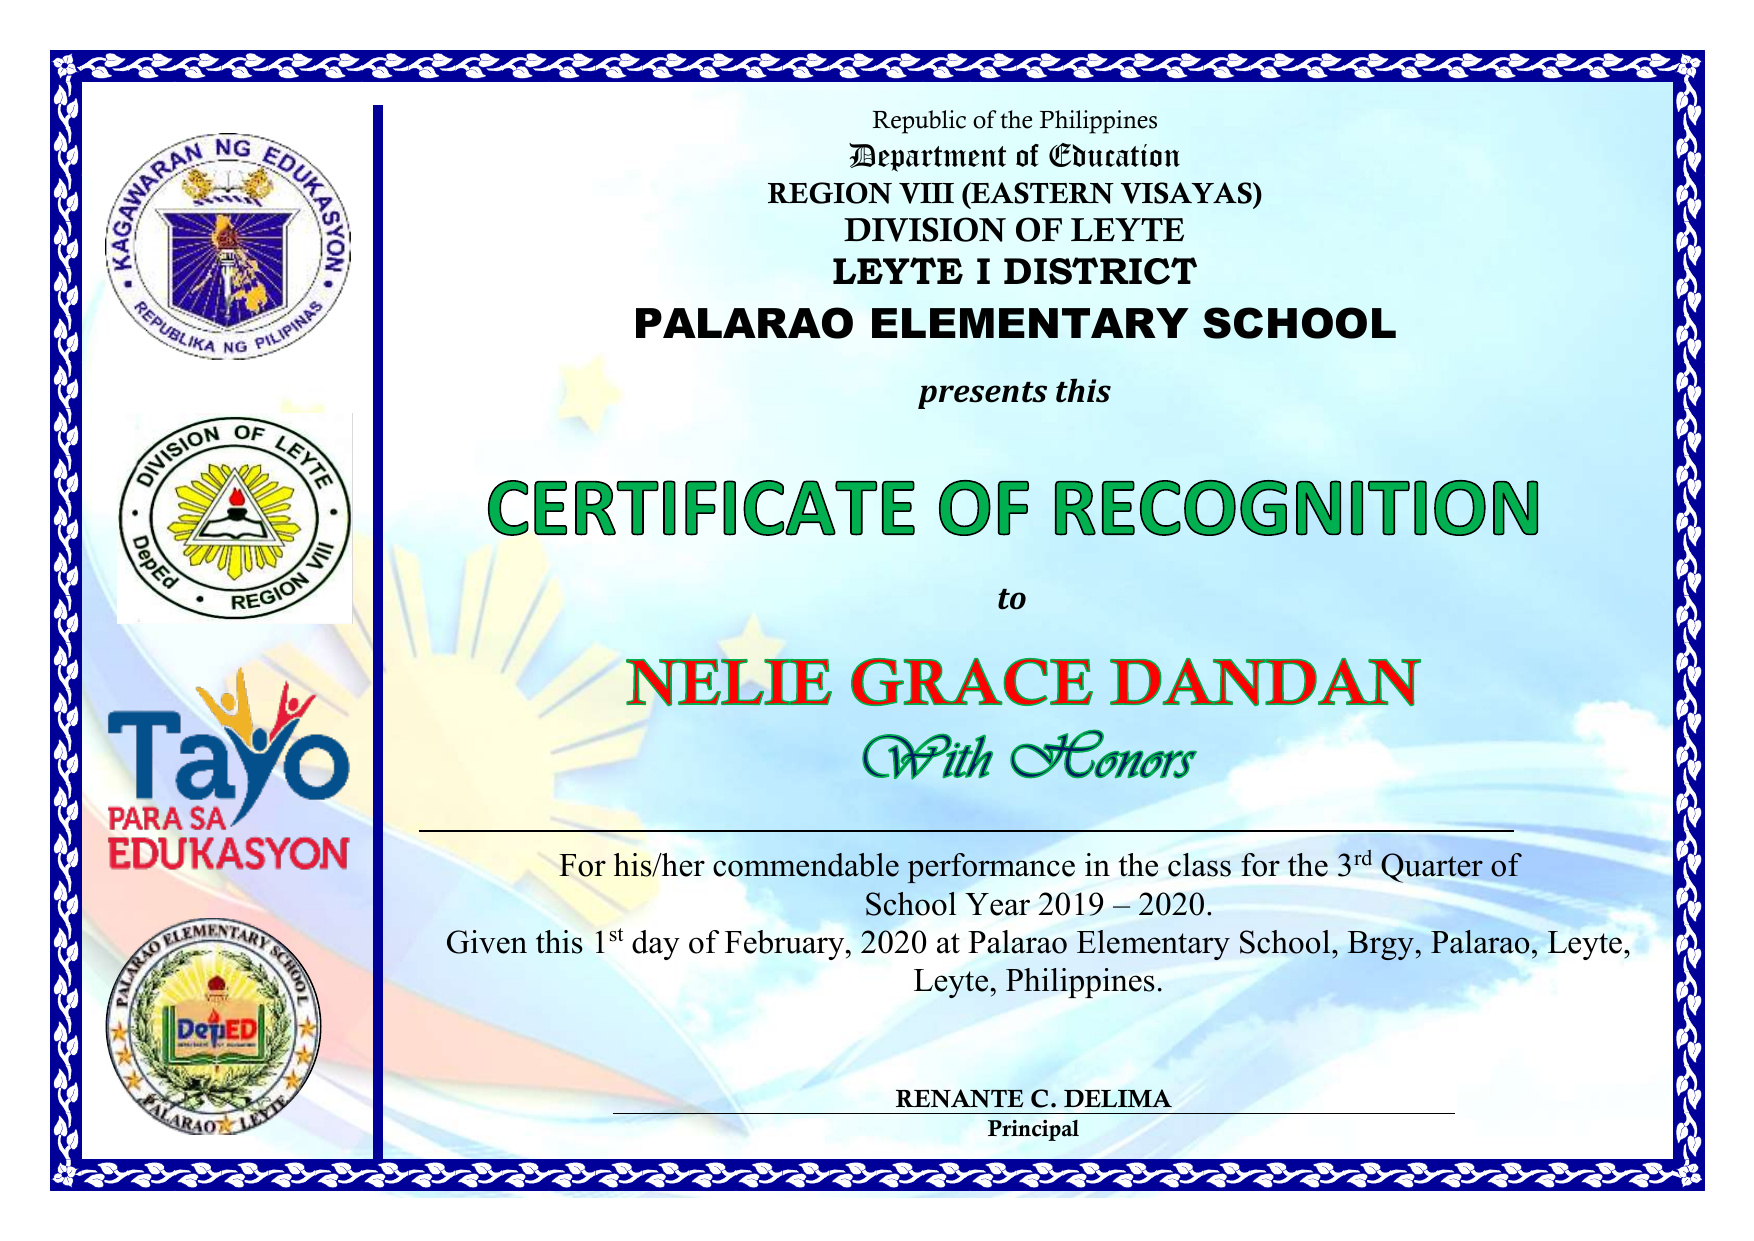 deped-cert-of-recognition-template-10-downloadable-certificate-of